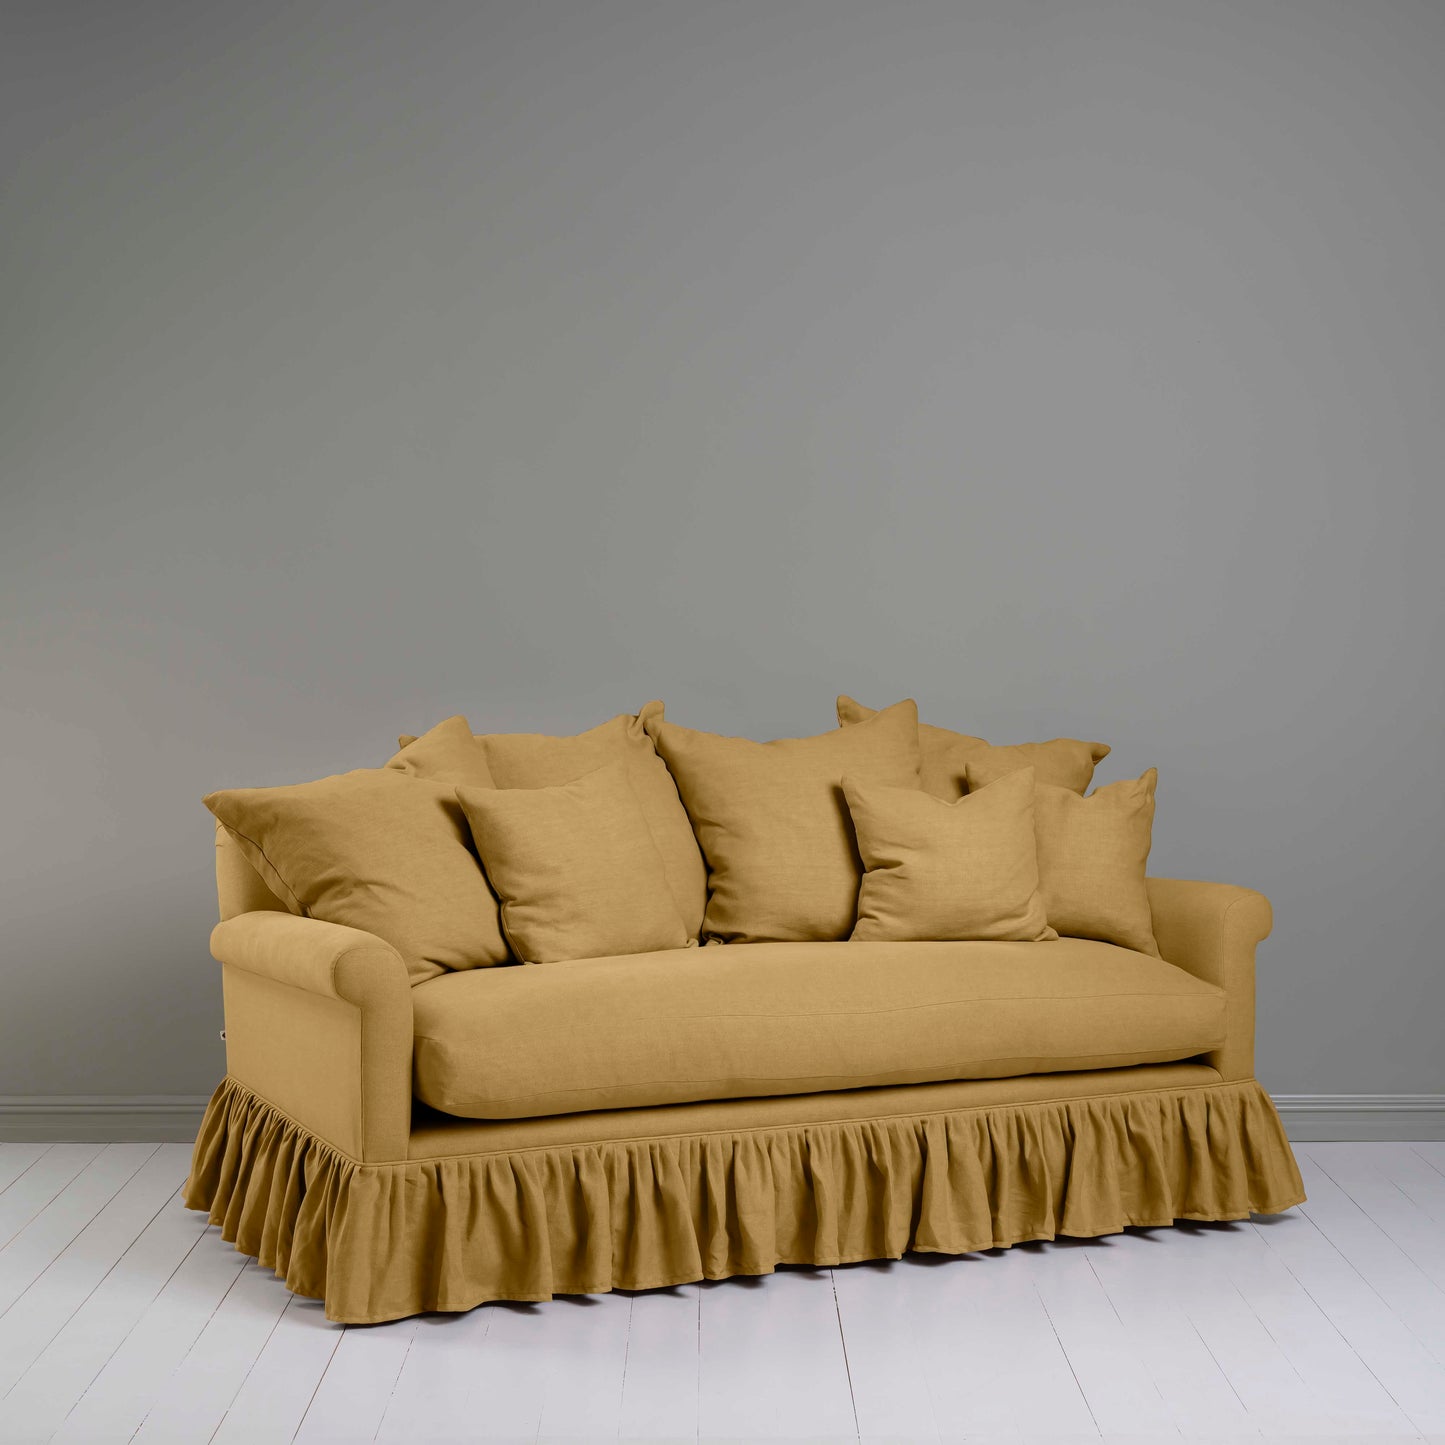 Curtain Call 3 Seater Sofa in Laidback Linen Ochre